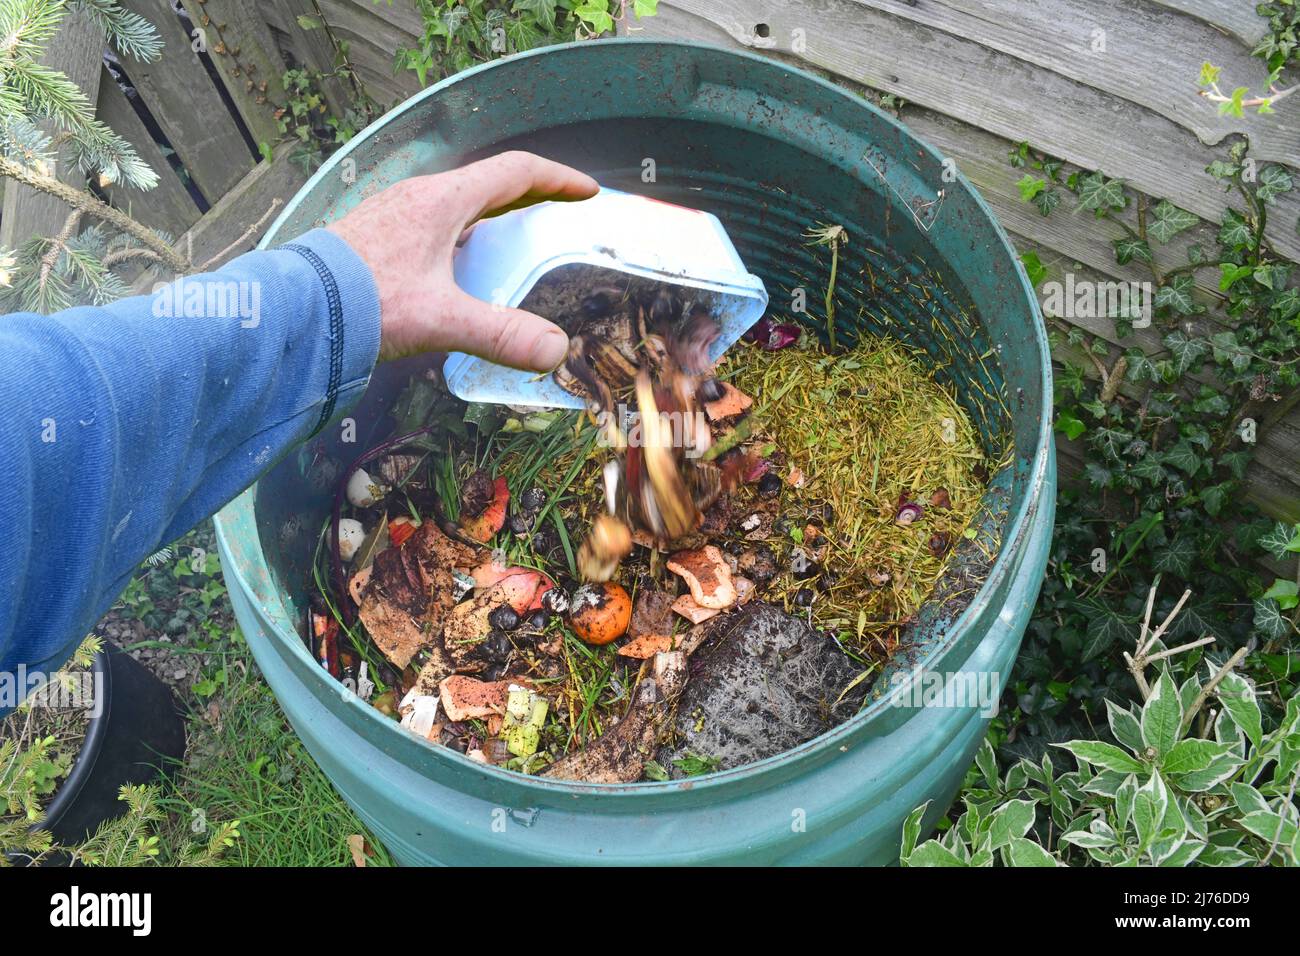 person throwing household waste into composting bin Stock Photo